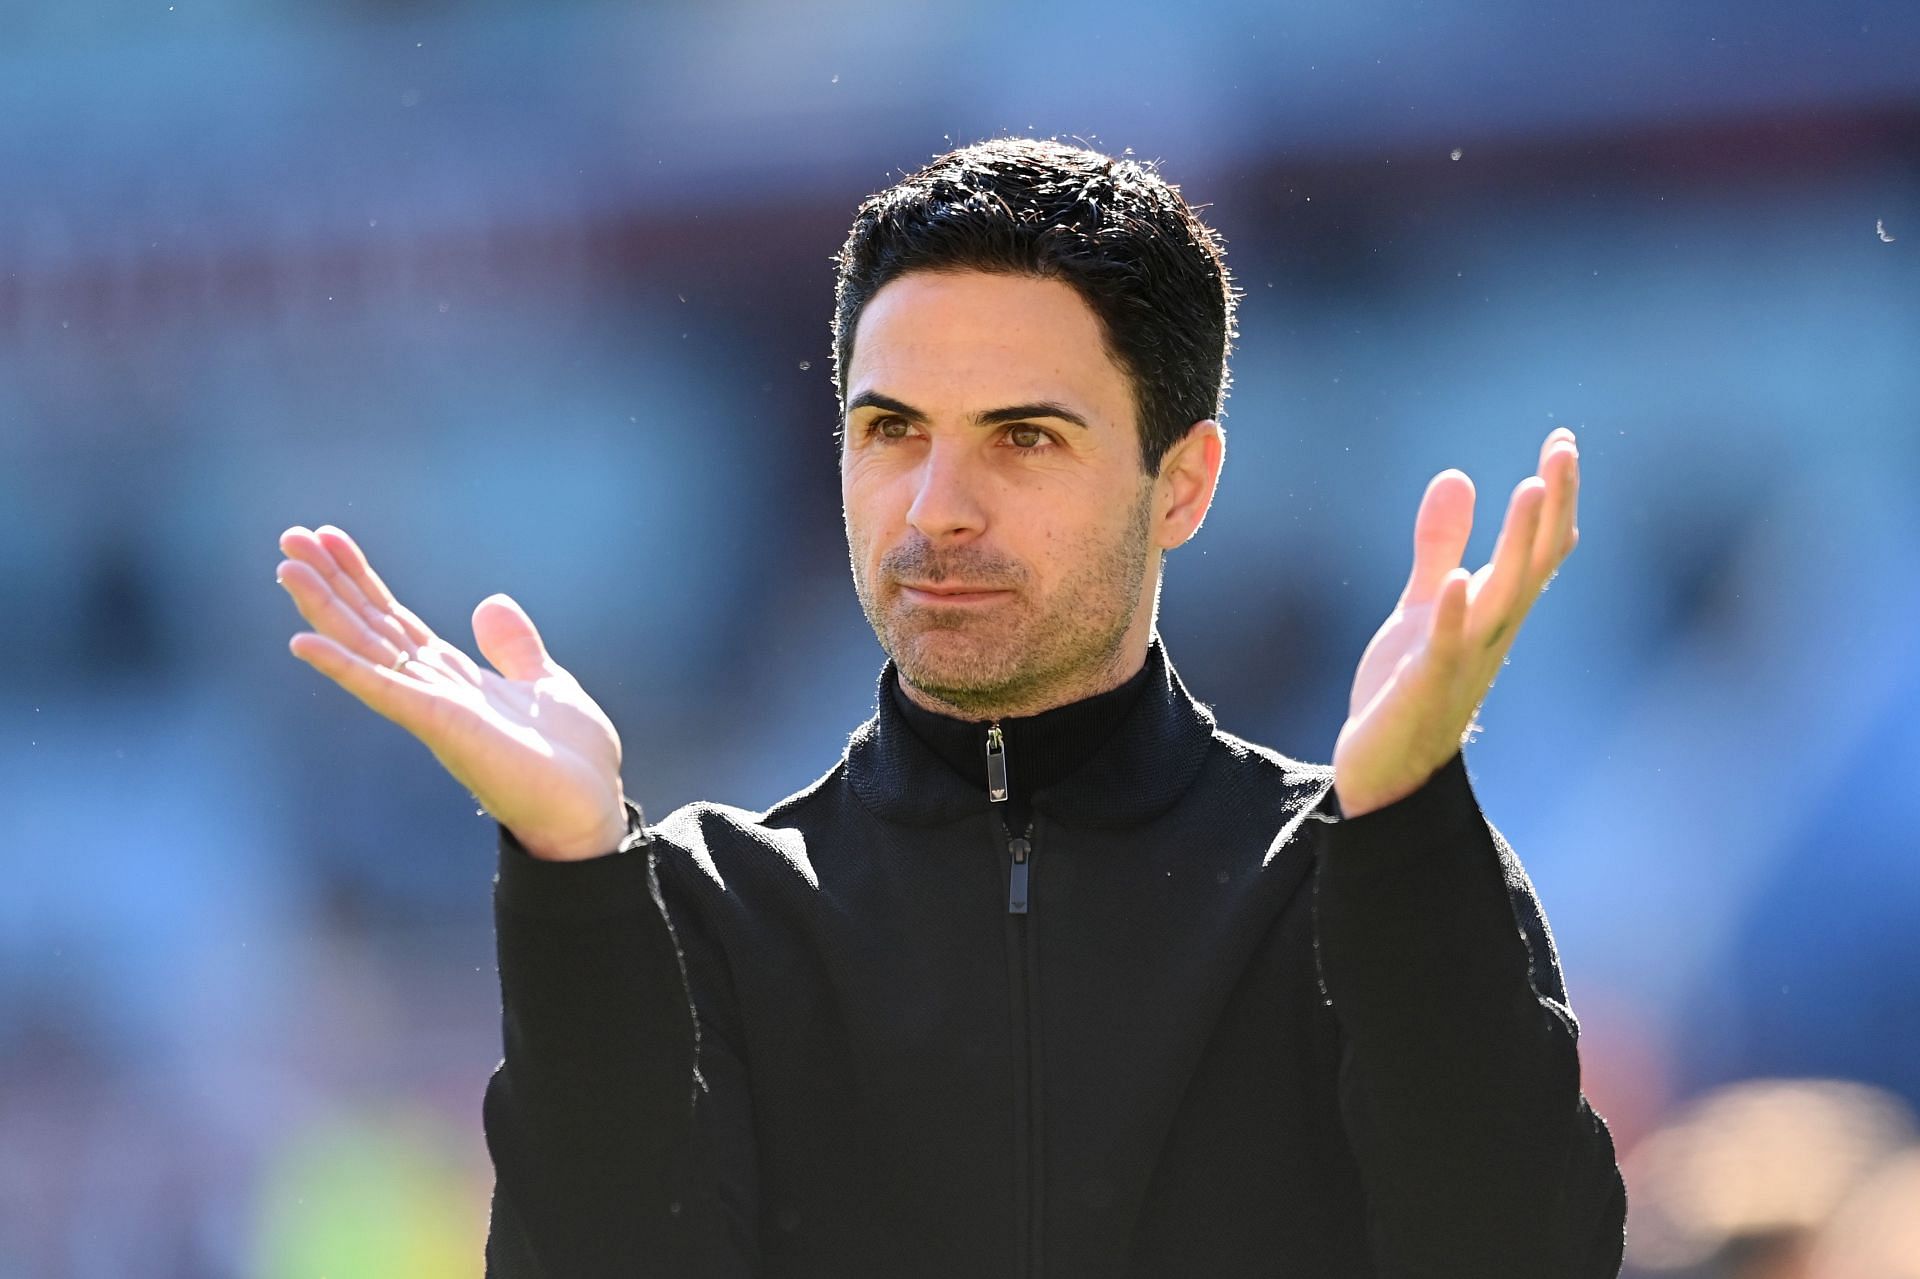 Arsenal manager Mikel Arteta has his eye on fourth place in the Premier League;